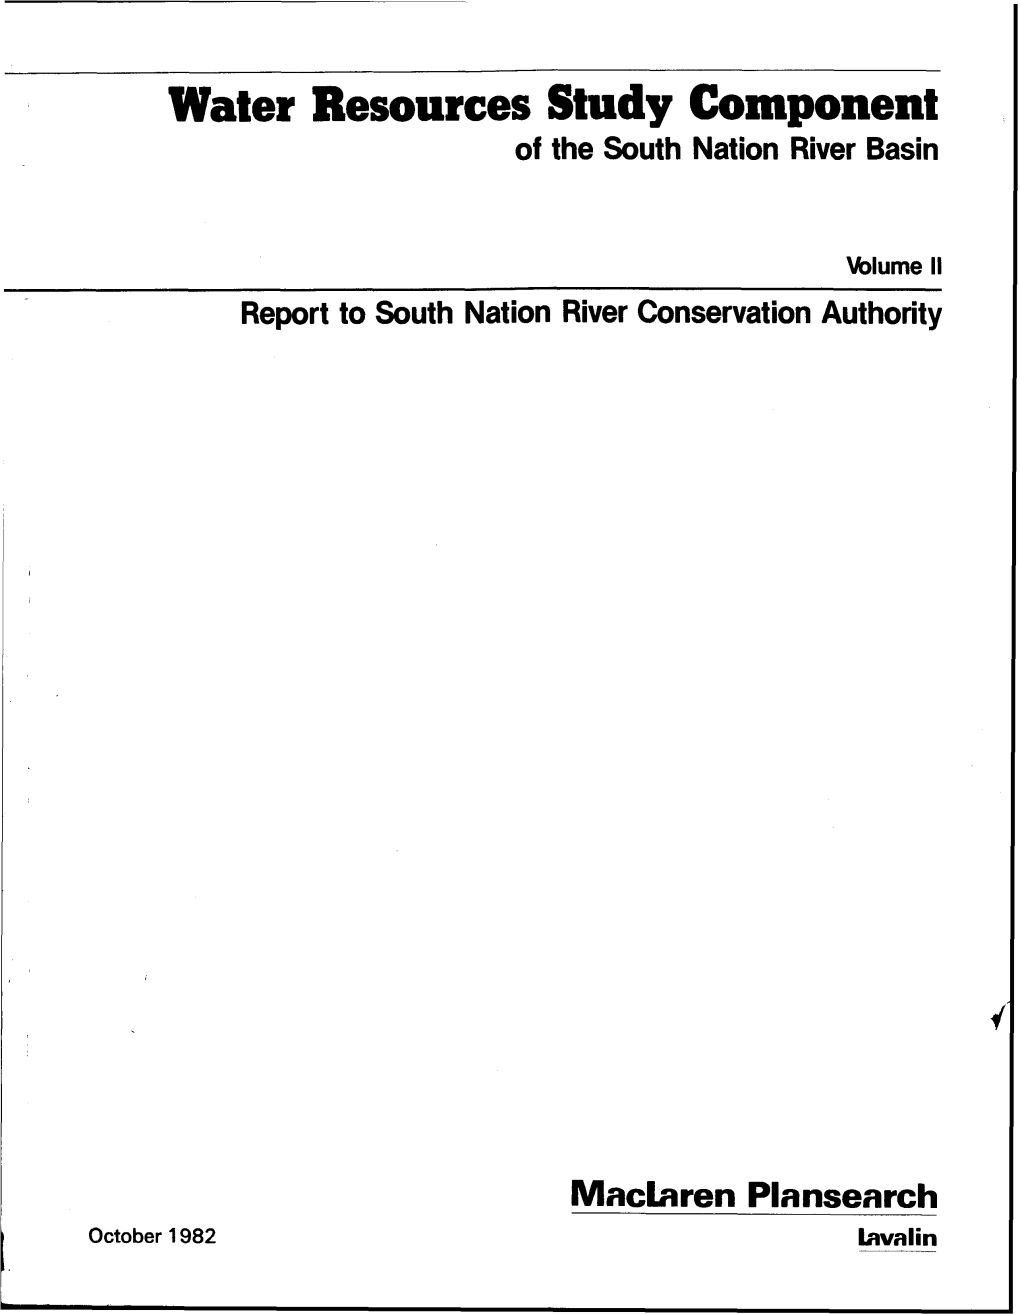 Water Resources Study Component of the South Nation River Basin